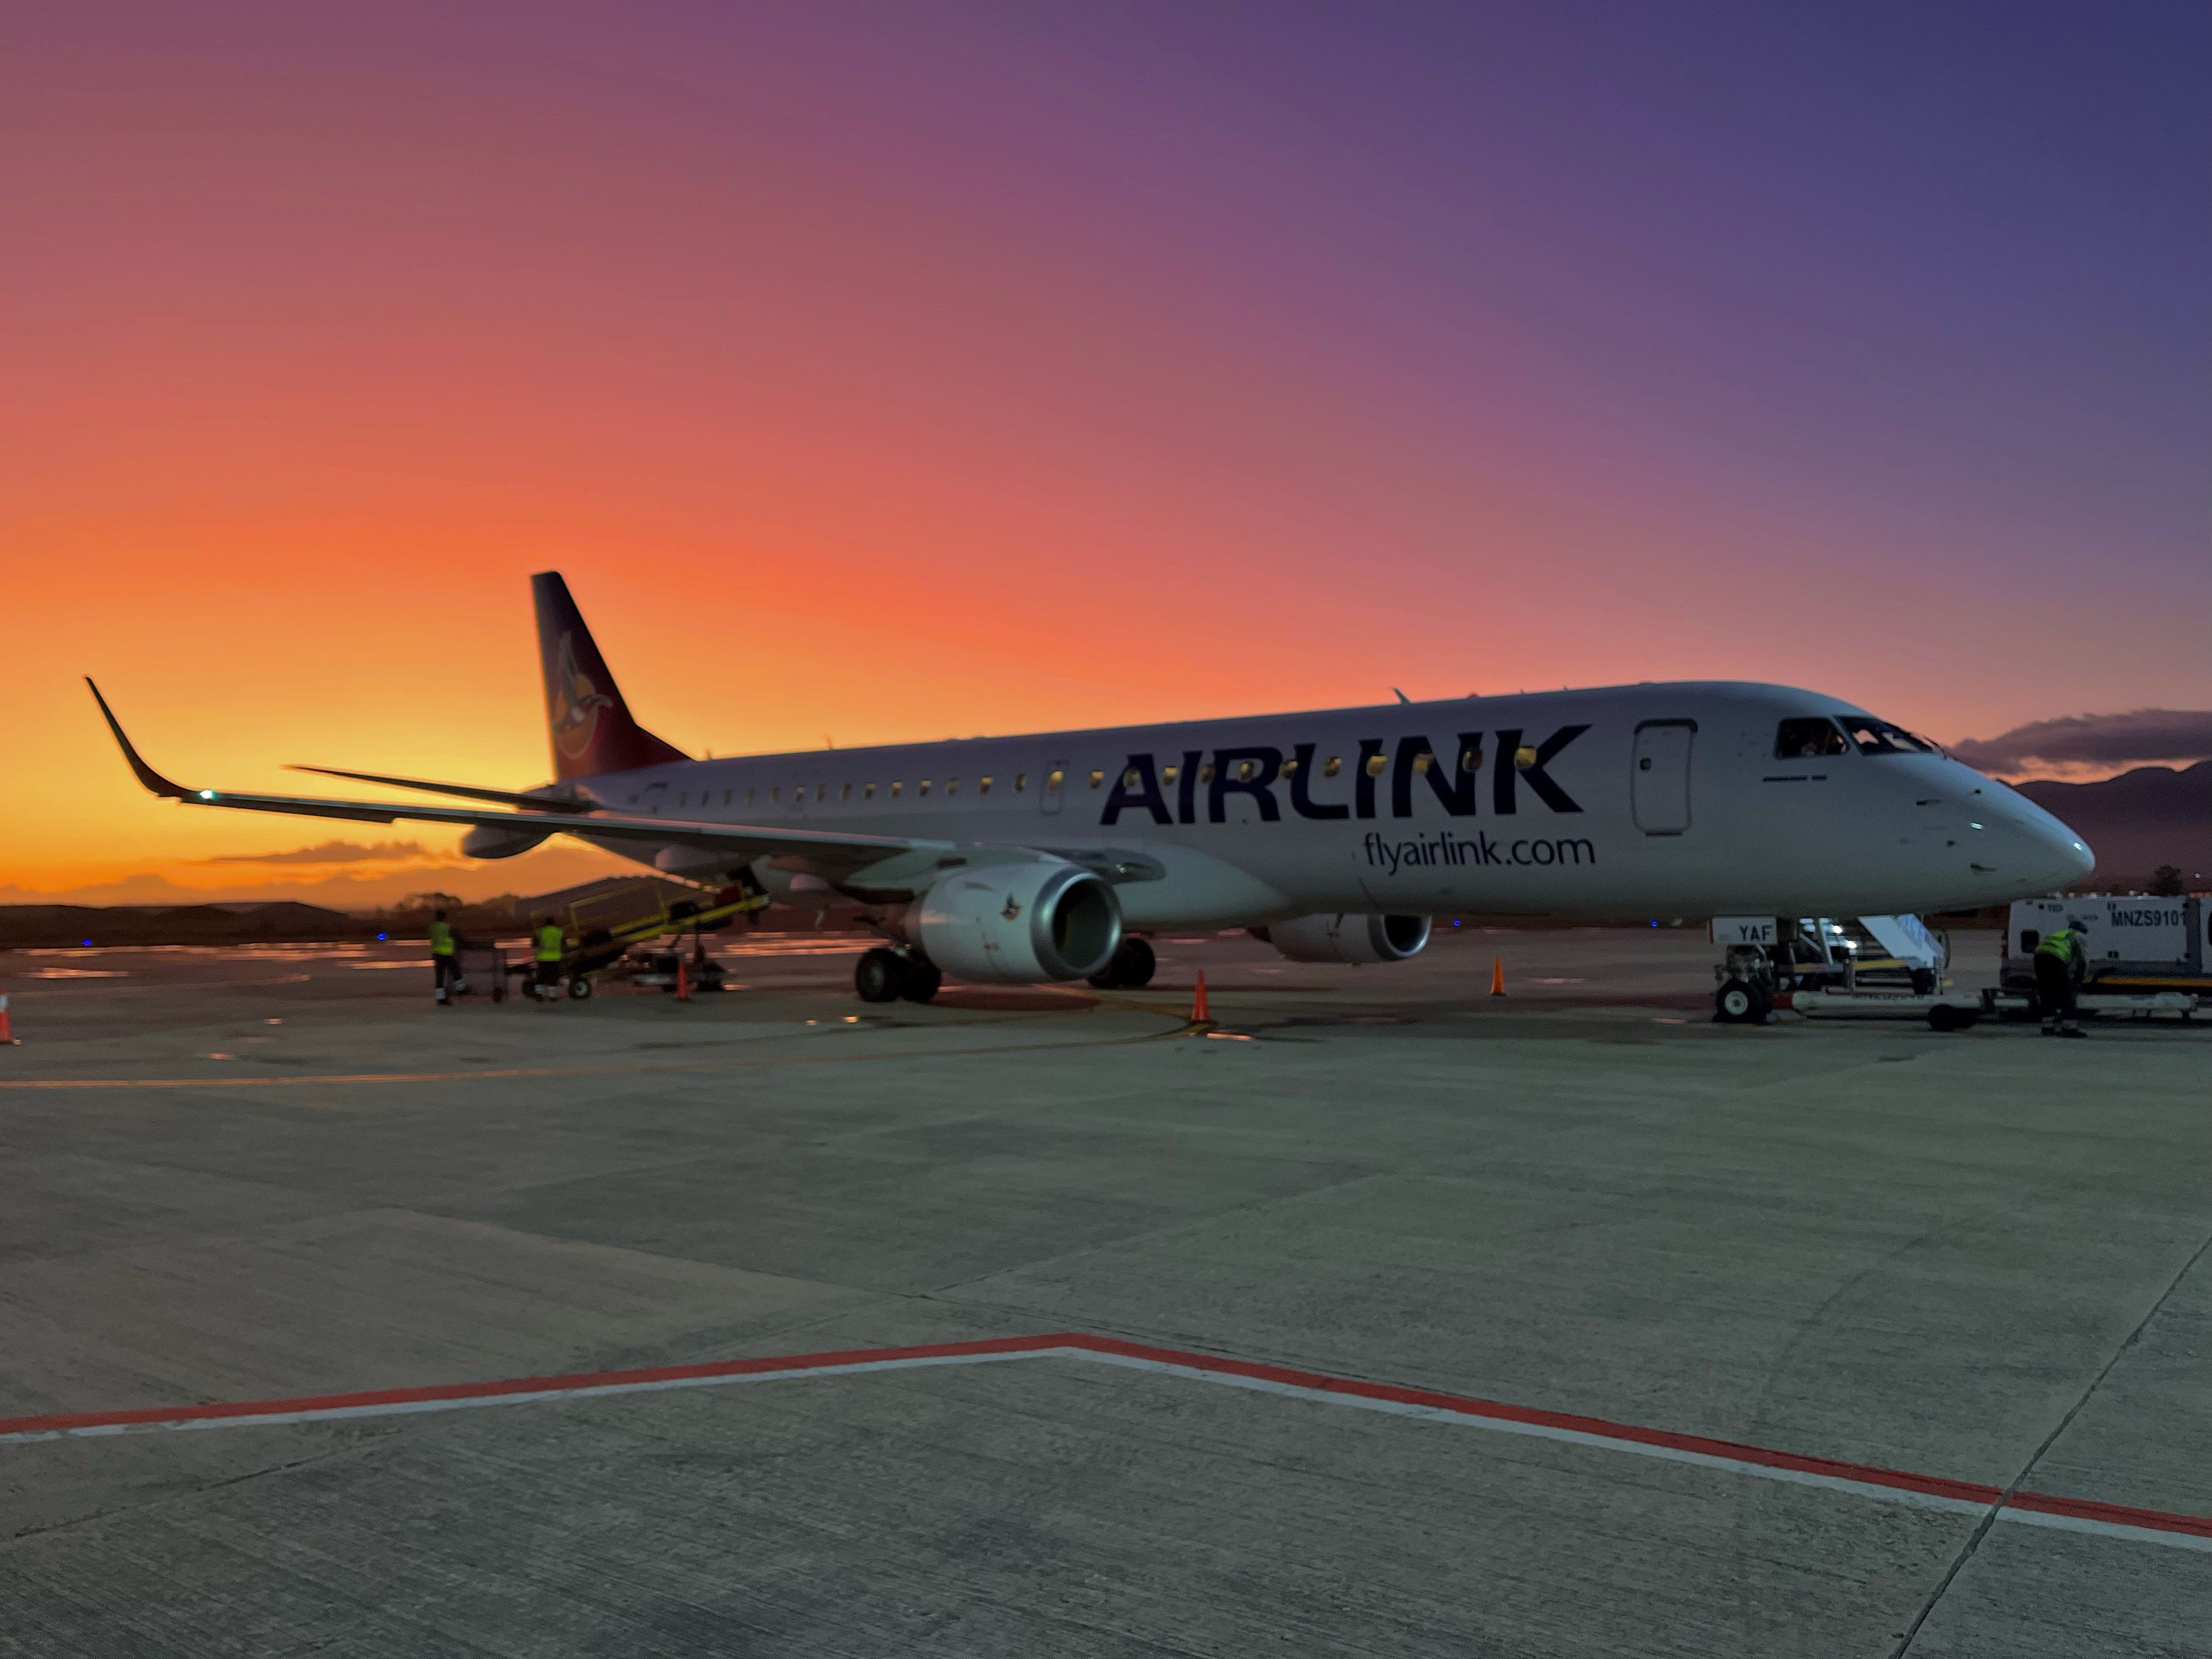 Airlink's Embraer E190 at sunset